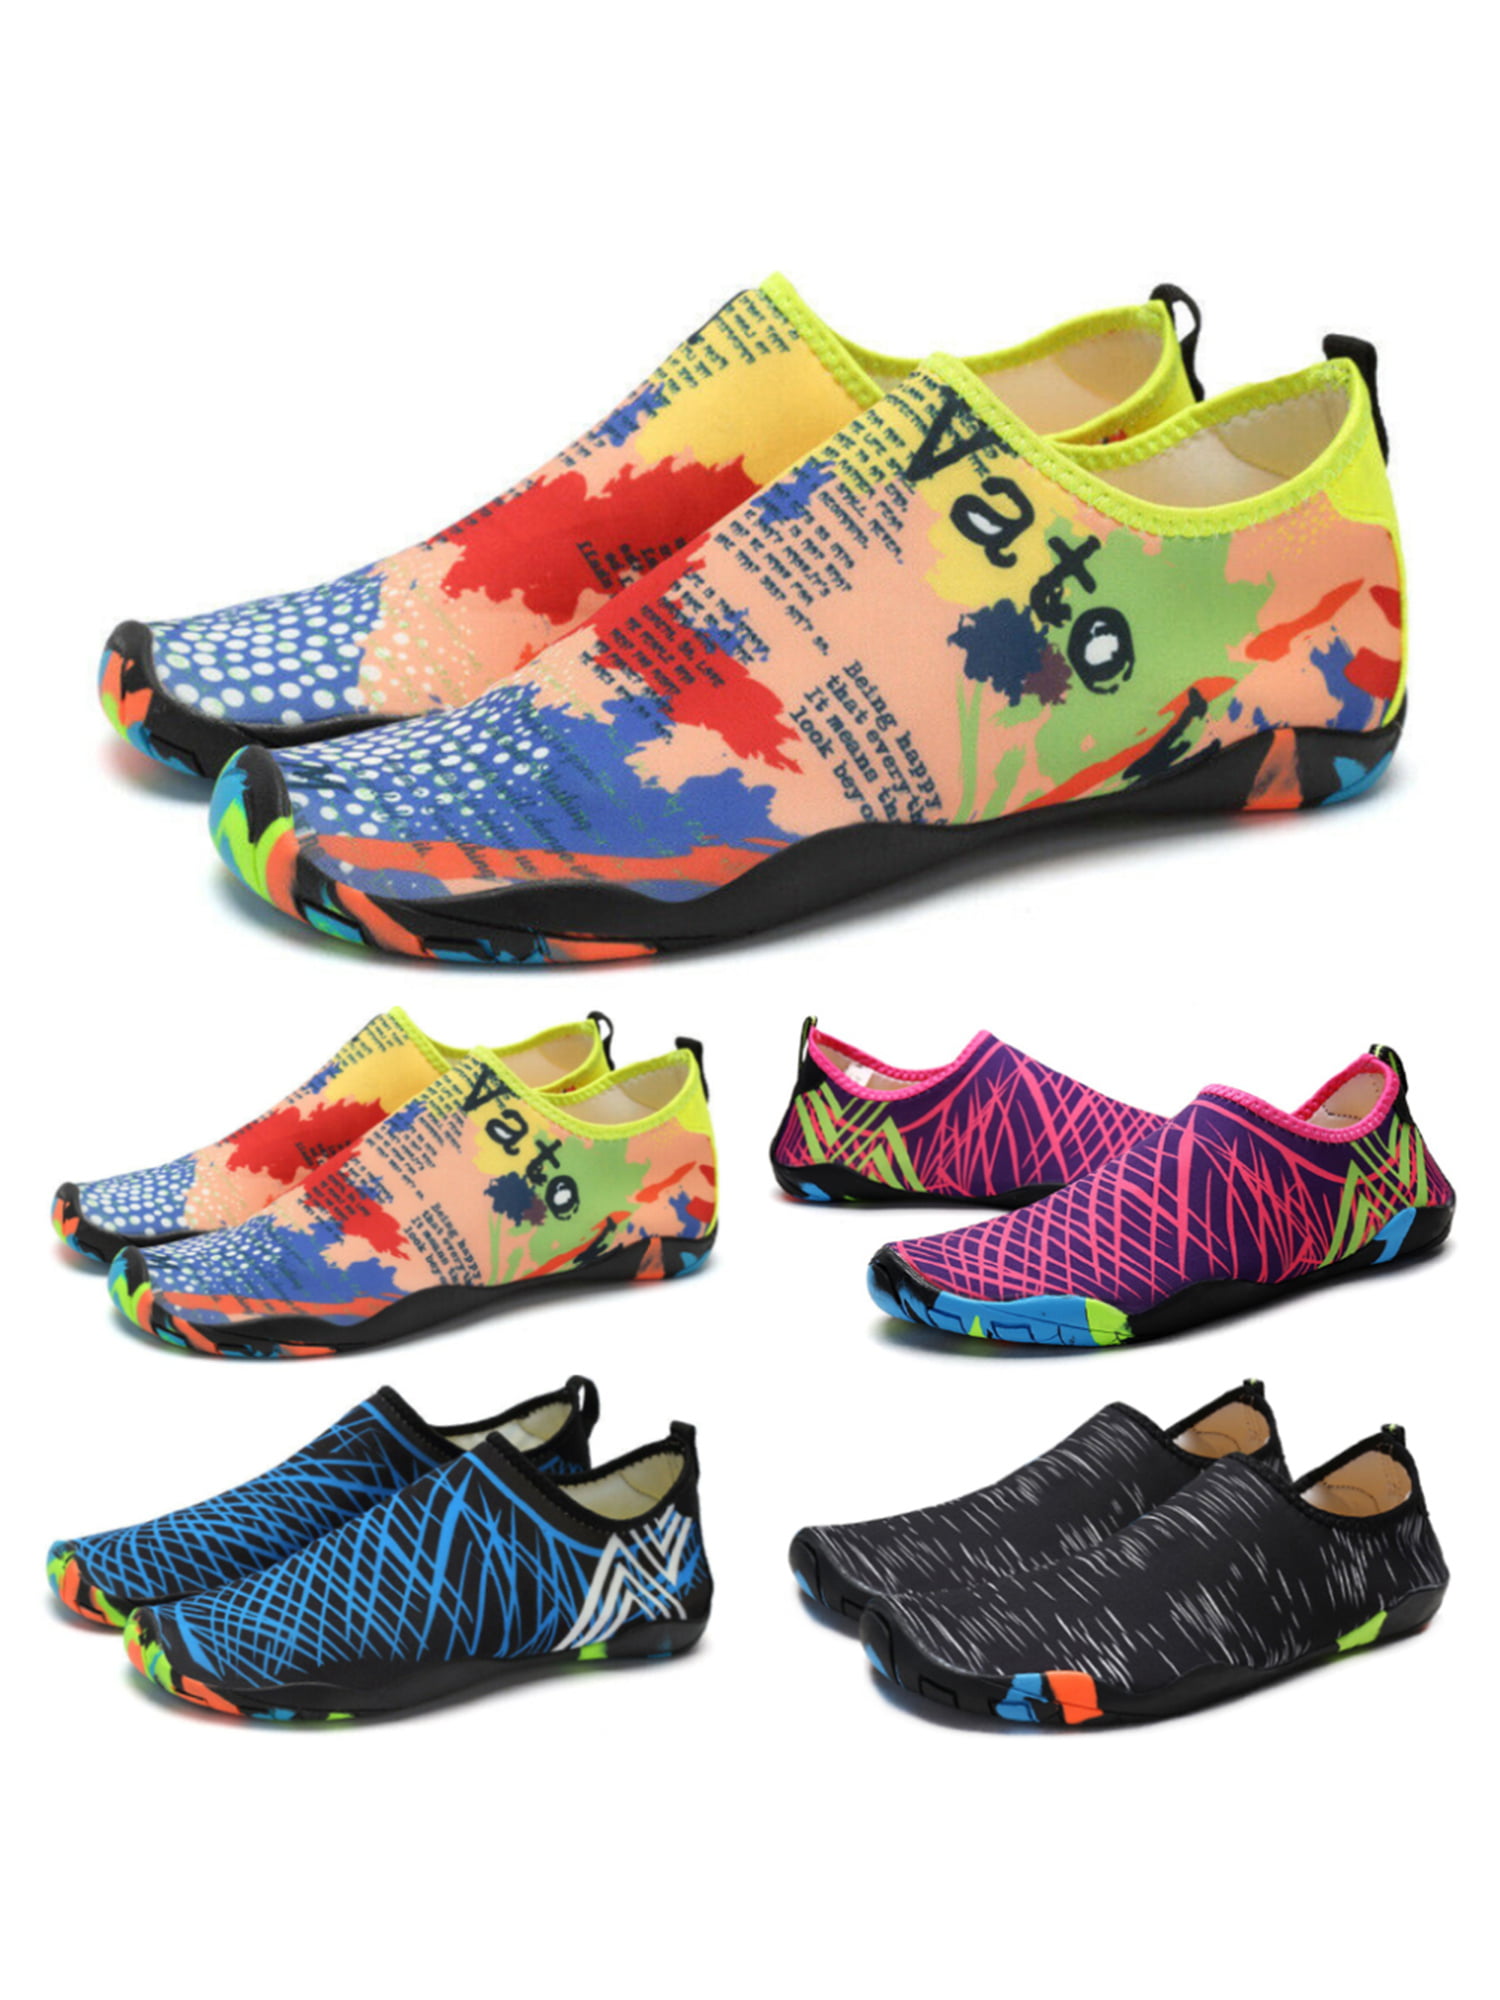 Mens Non Slip Sea Snorkeling Swimming Beach Outdoor Surfing Wading Shoes Casual 